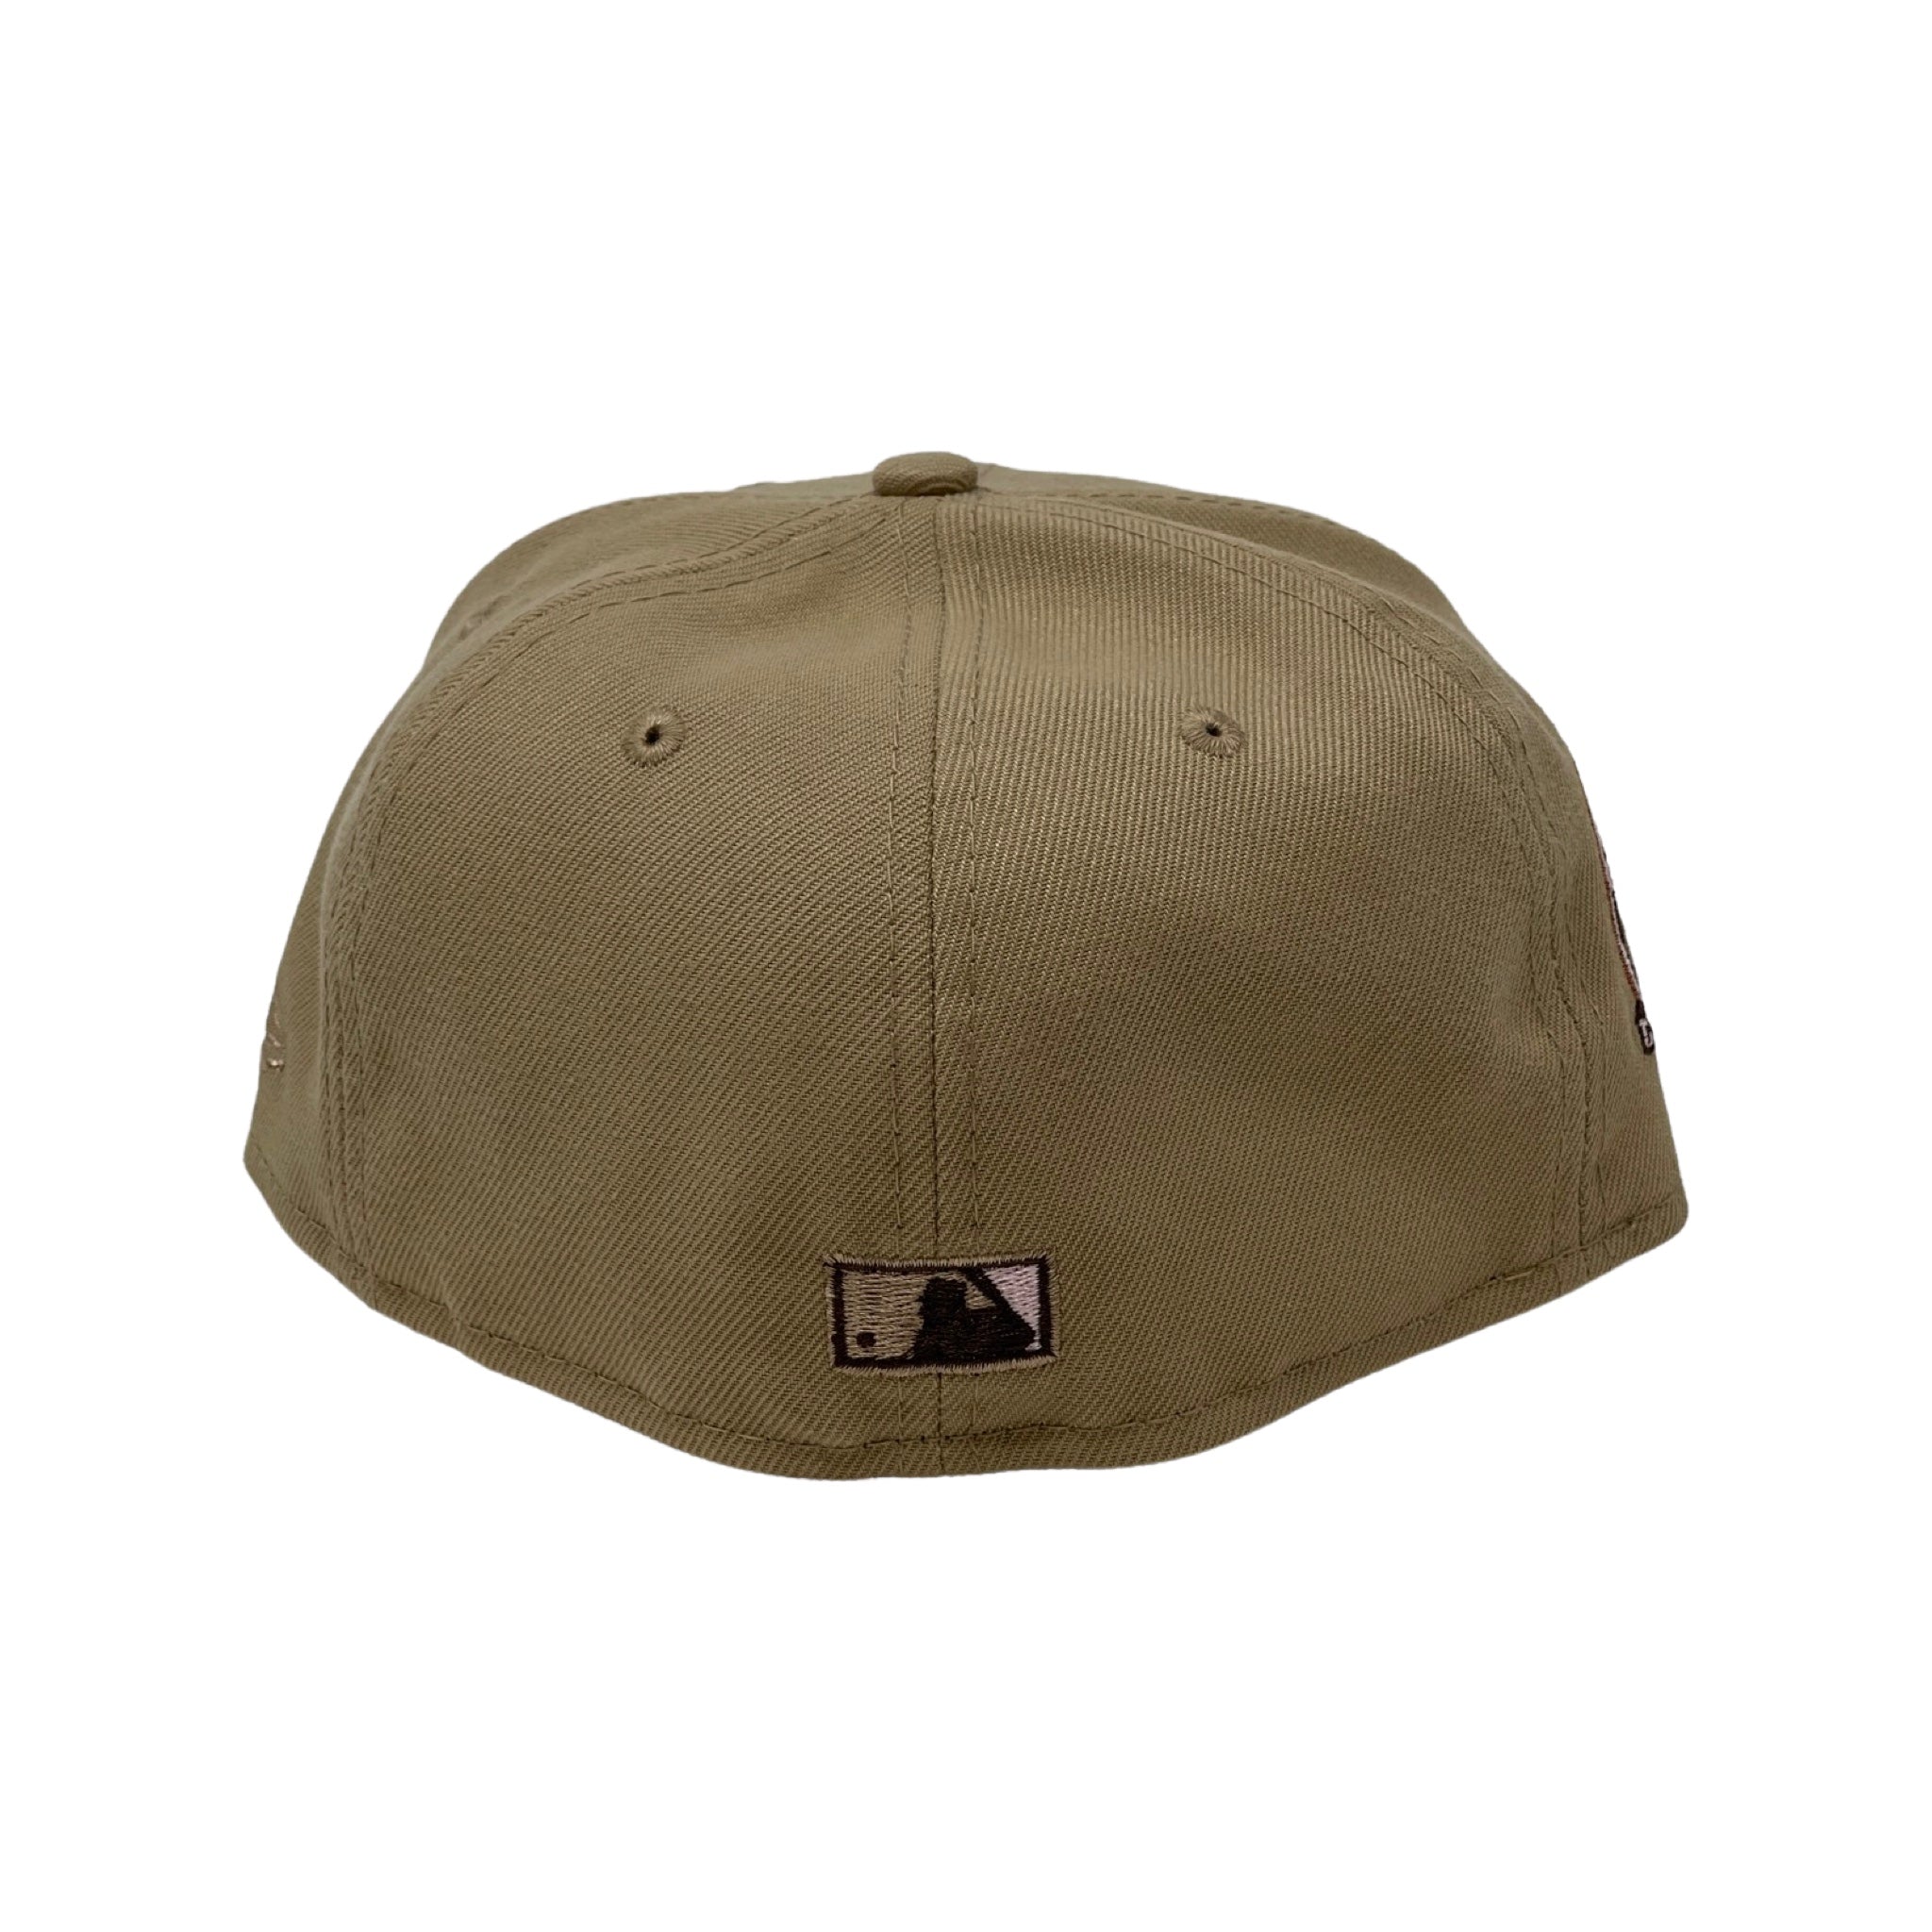 Lids San Diego Padres New Era 59FIFTY Fitted Hat - Khaki